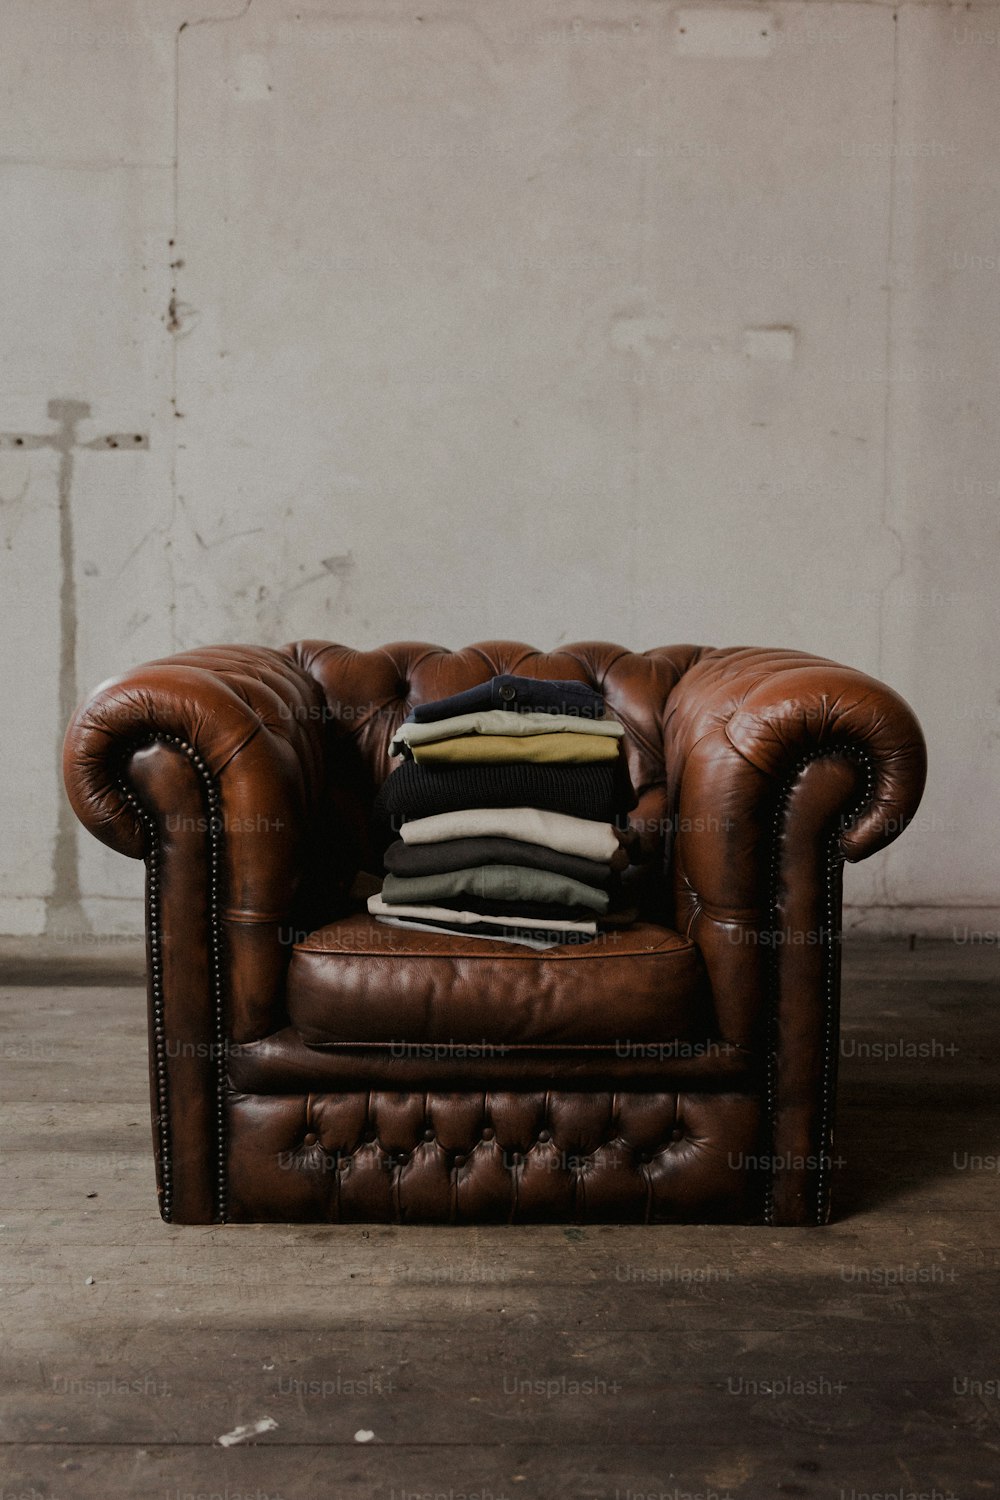 a brown leather chair with a stack of pillows on top of it